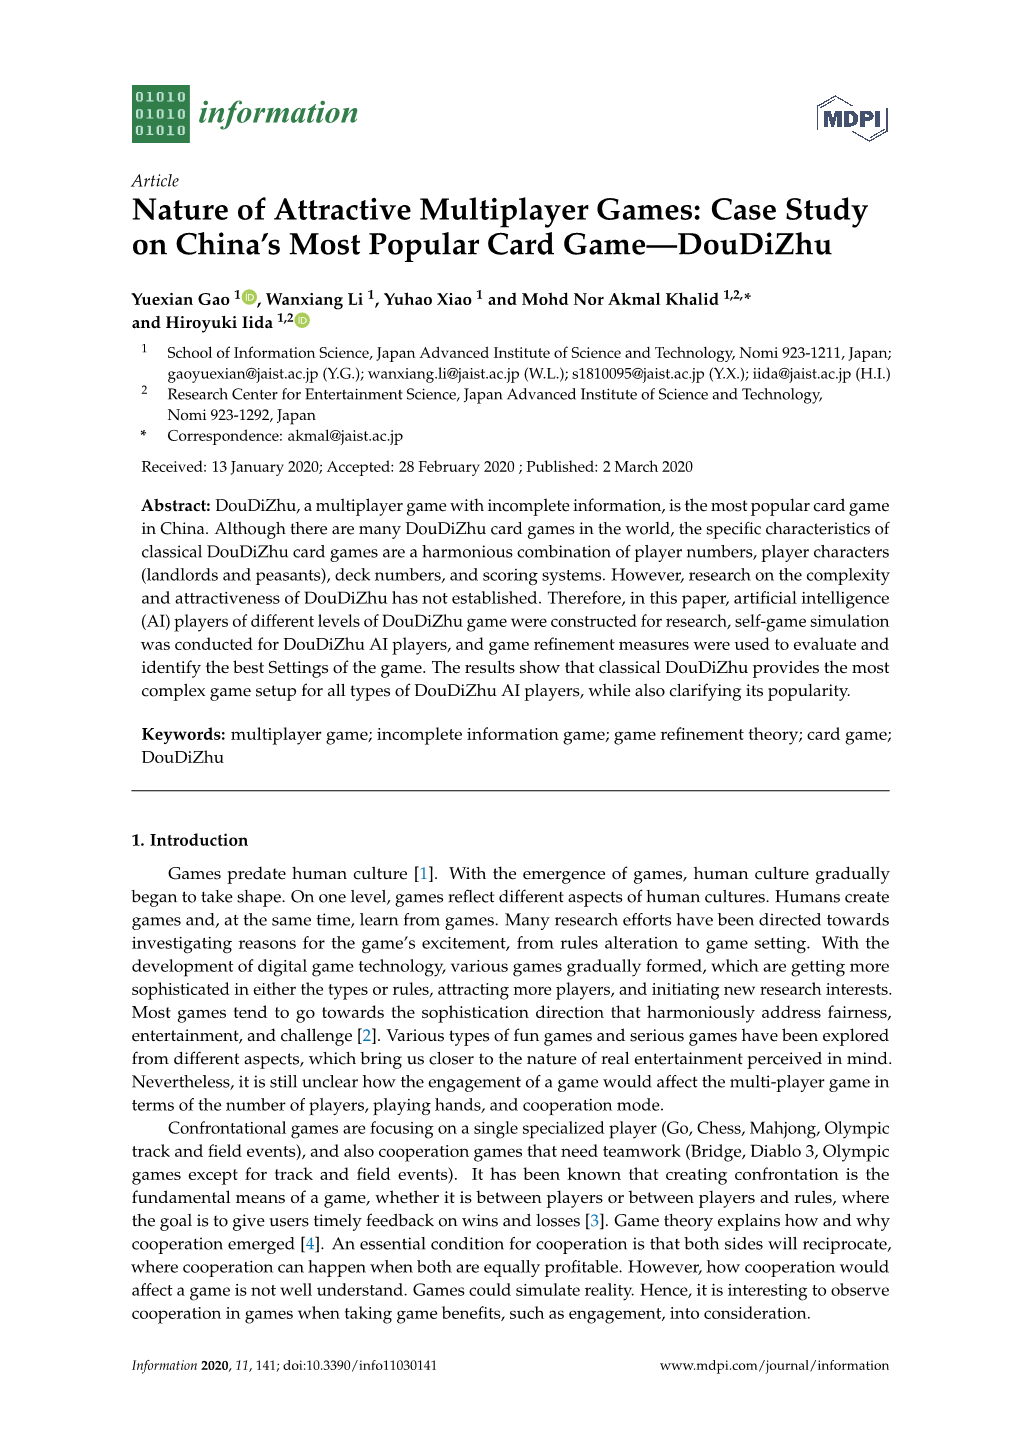 Nature of Attractive Multiplayer Games: Case Study on China's Most